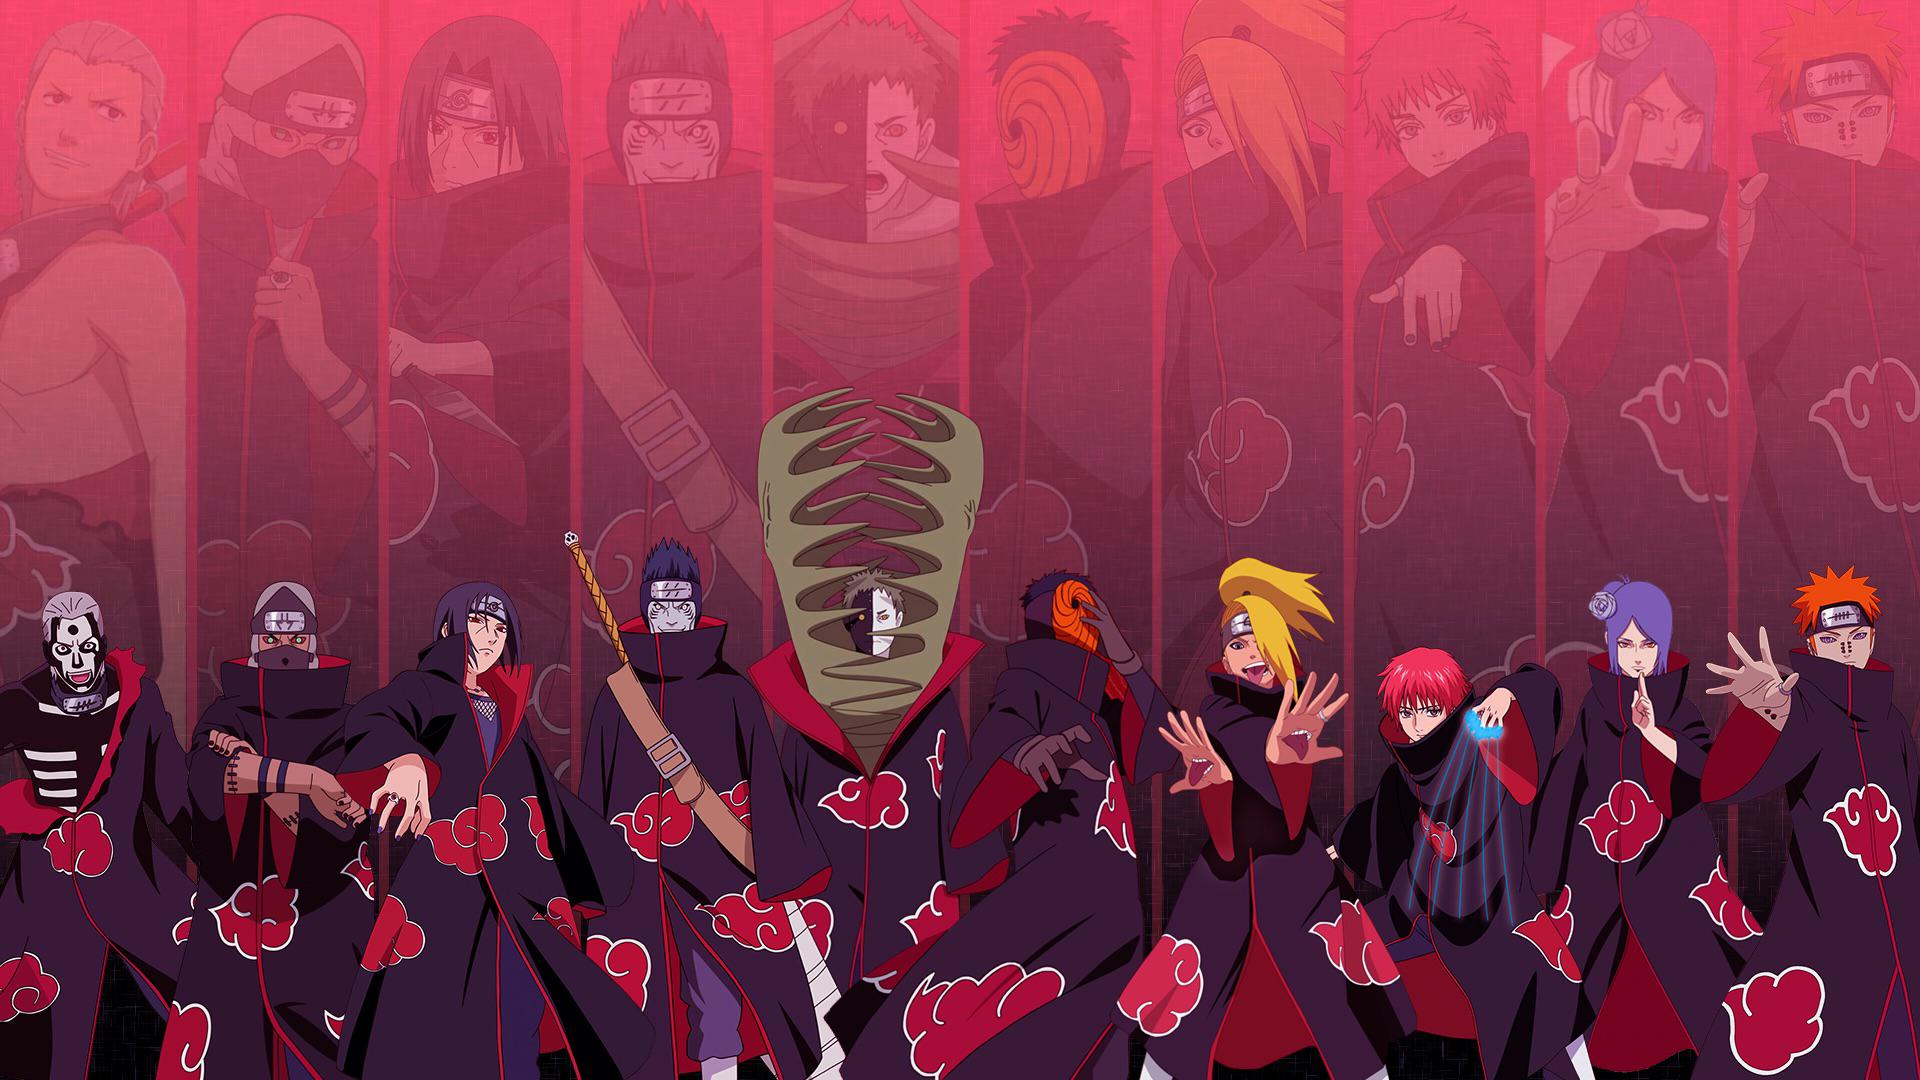 So which one of these guys could current team 7 beat? wallpaper